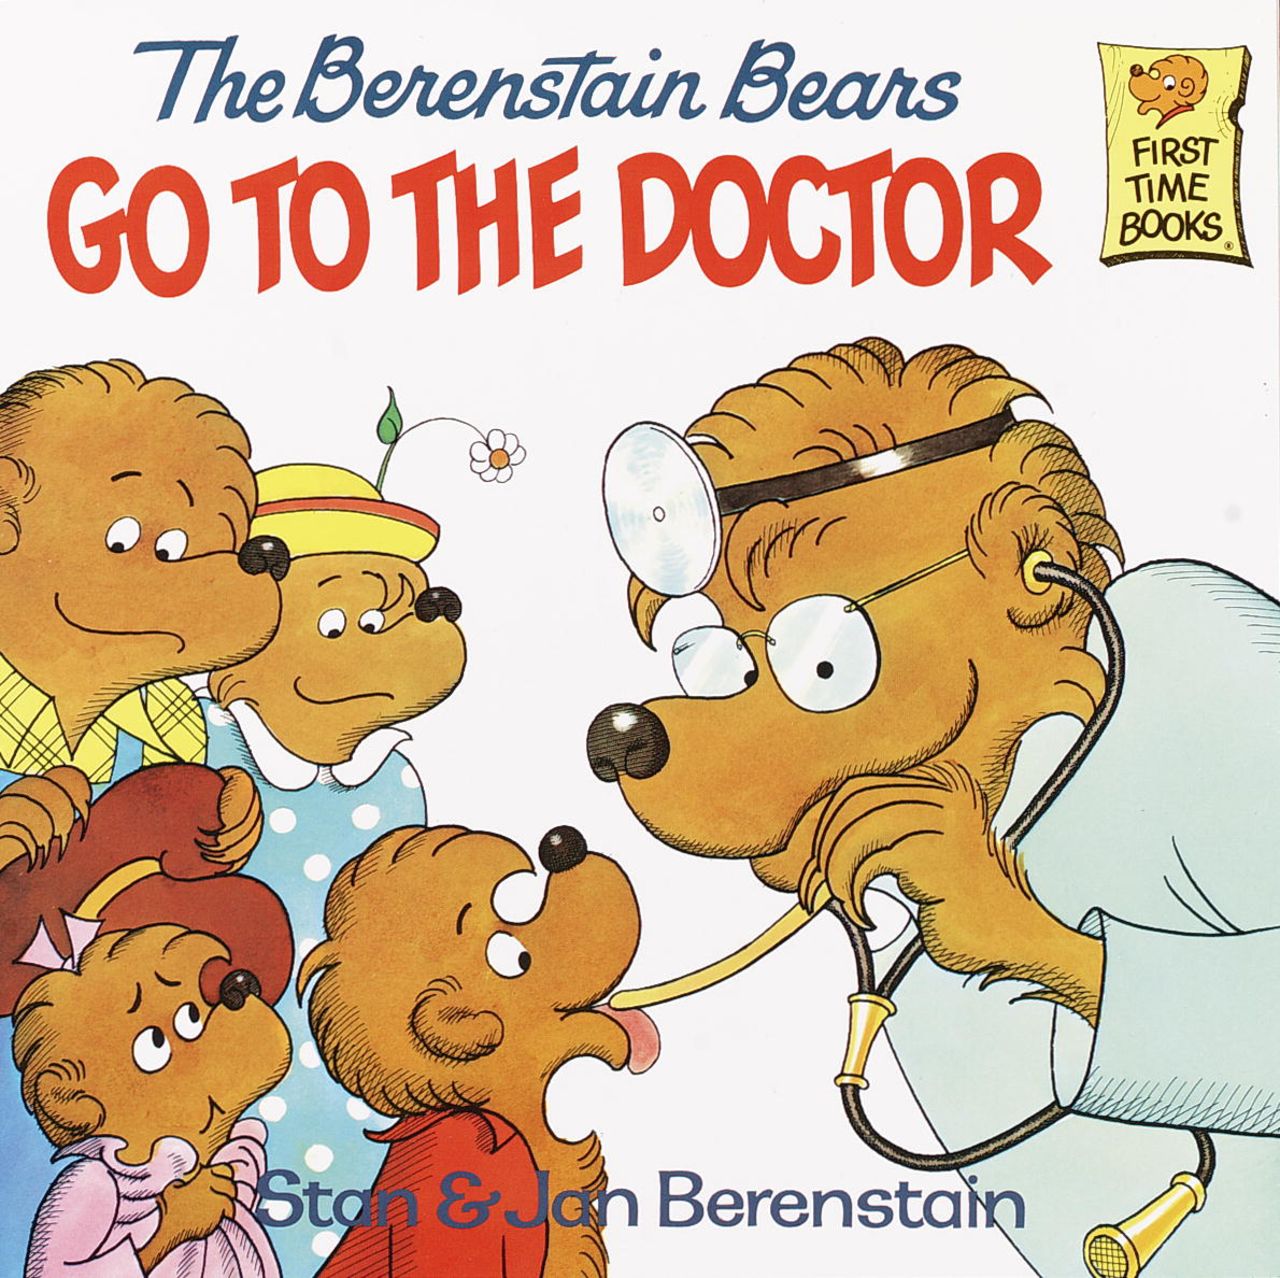 Stan and Jan Berenstain answer children's questions about a doctor's visit. 